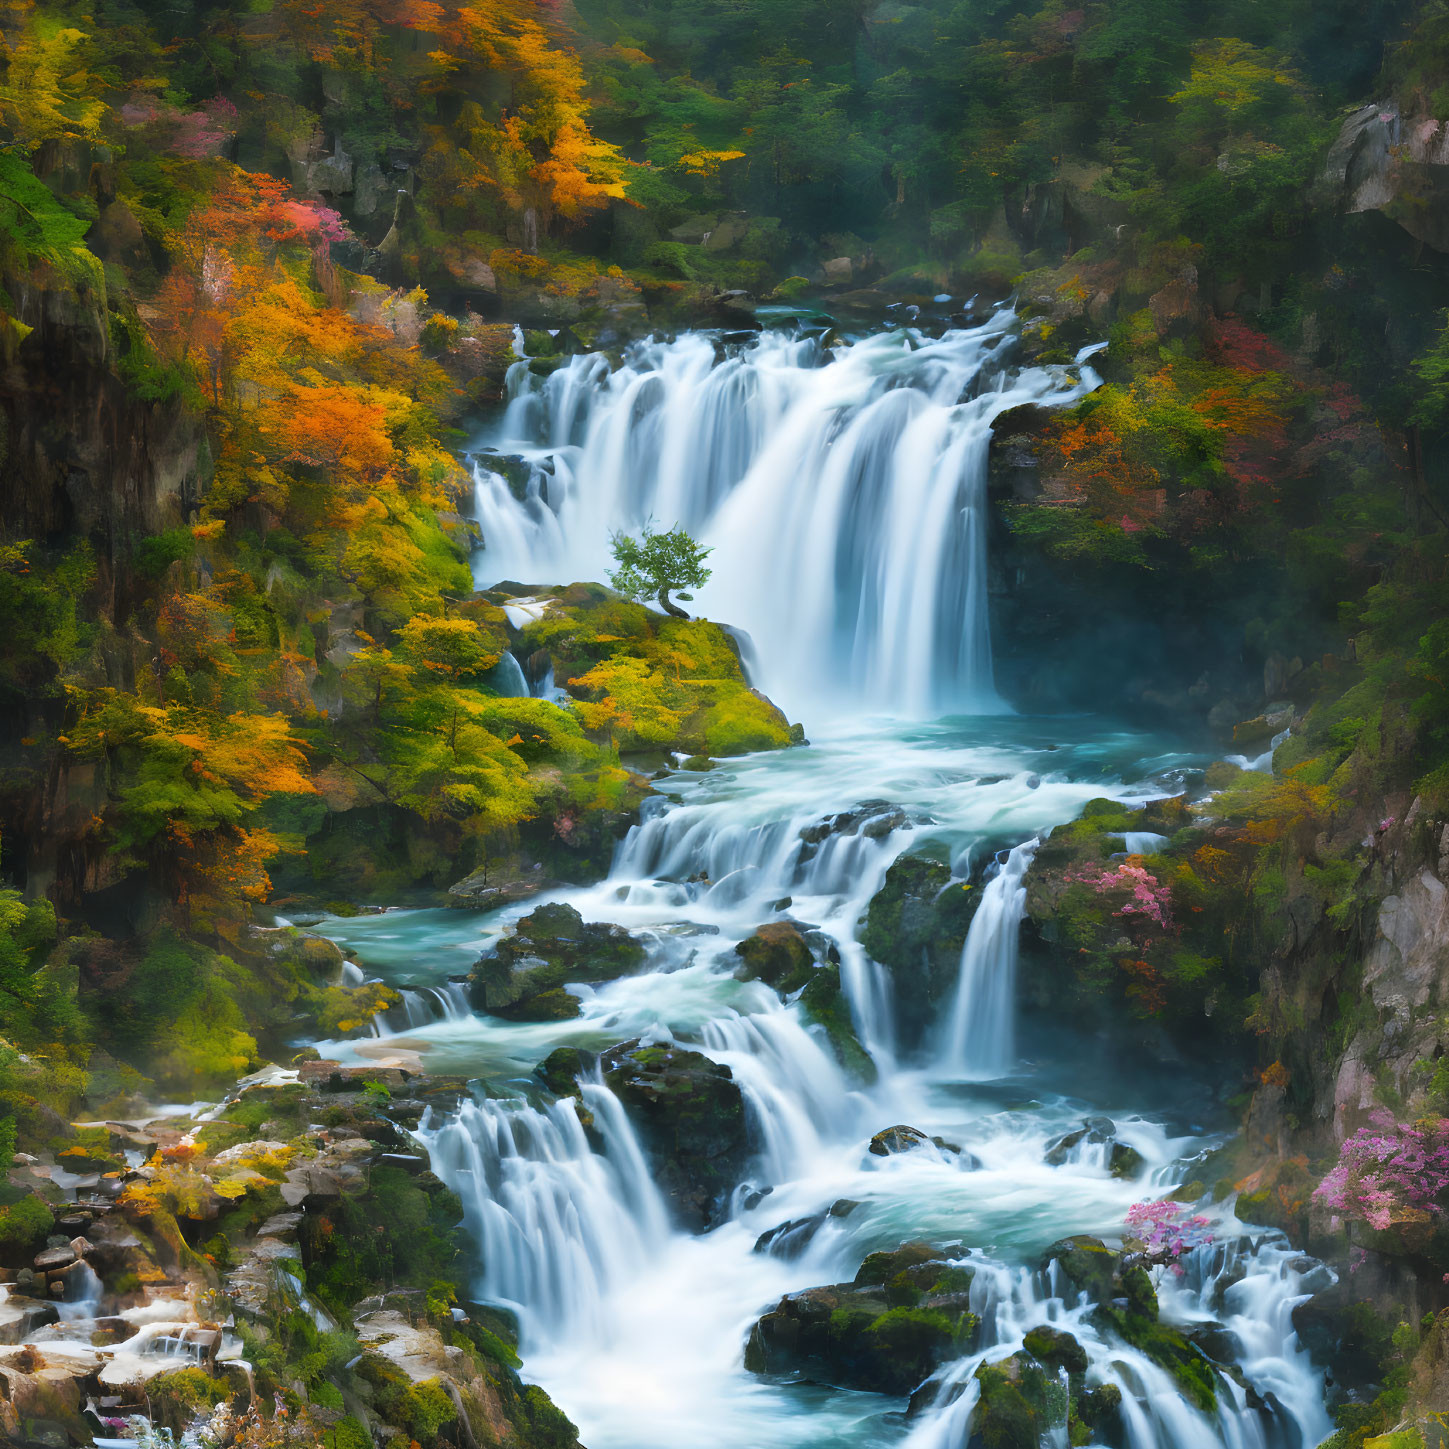 Autumn Foliage Surrounds Cascading Waterfall in Tranquil Forest